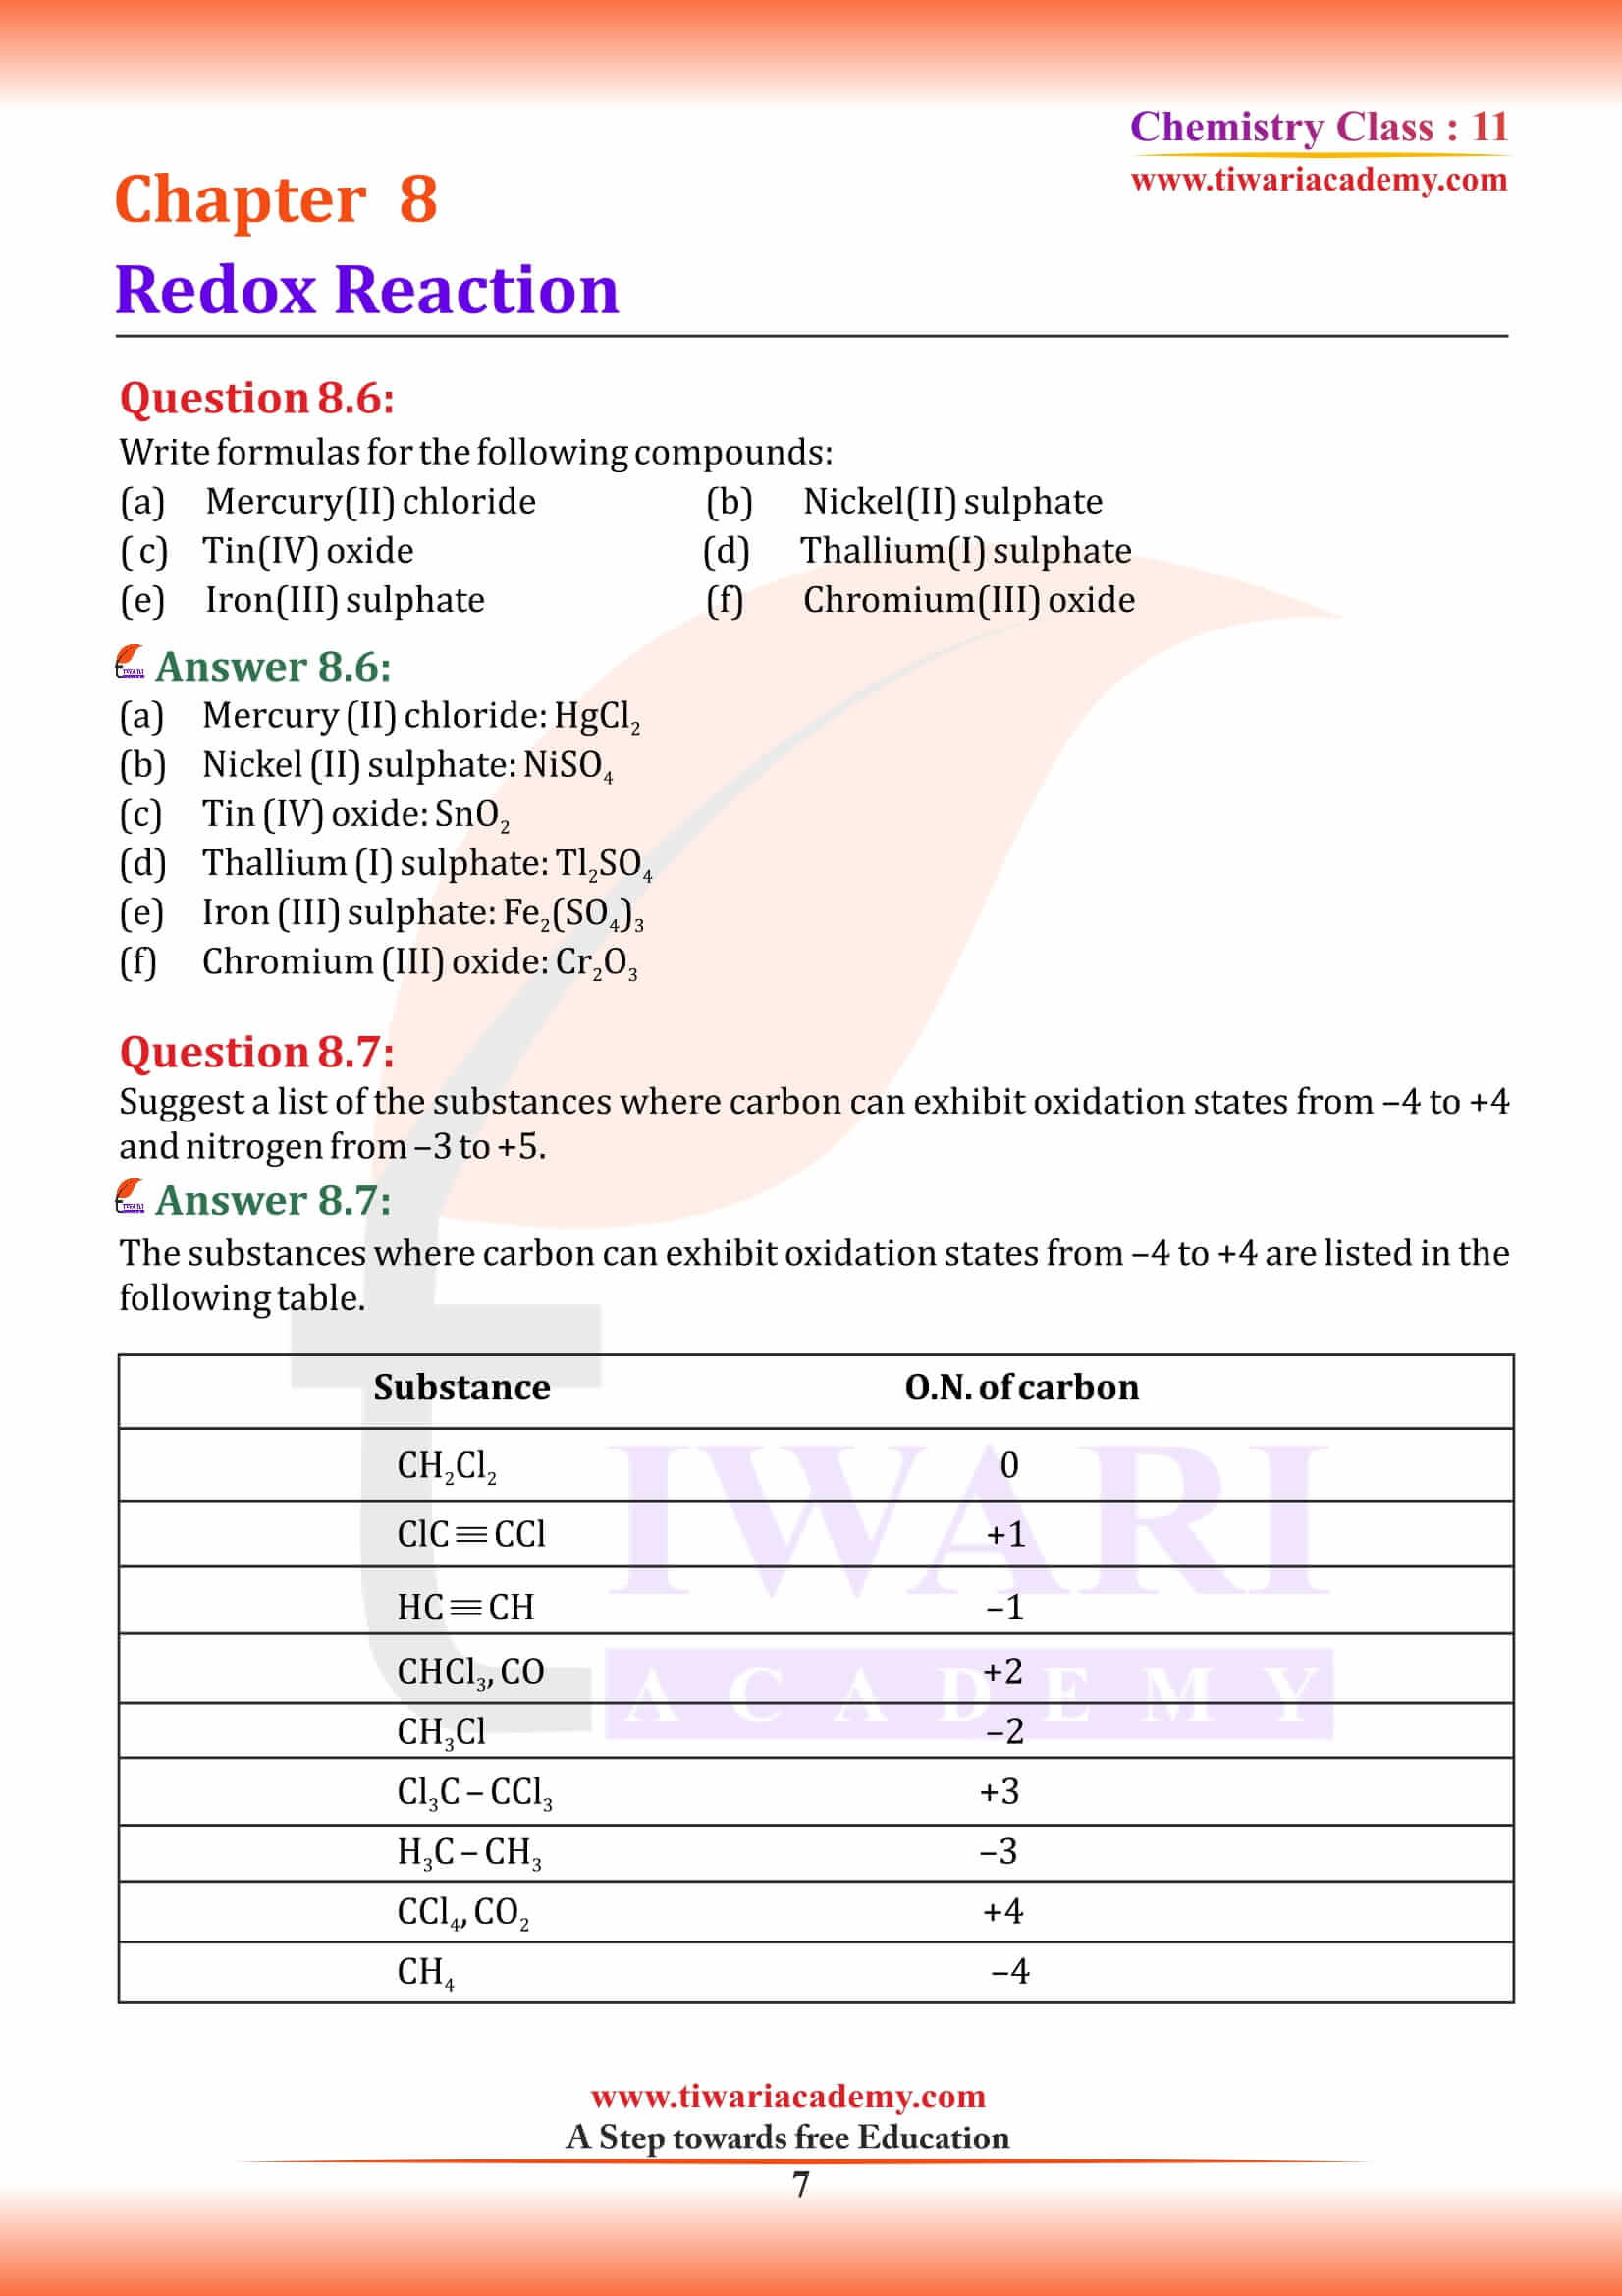 NCERT Solutions for Class 11 Chemistry Chapter 8 intext questions